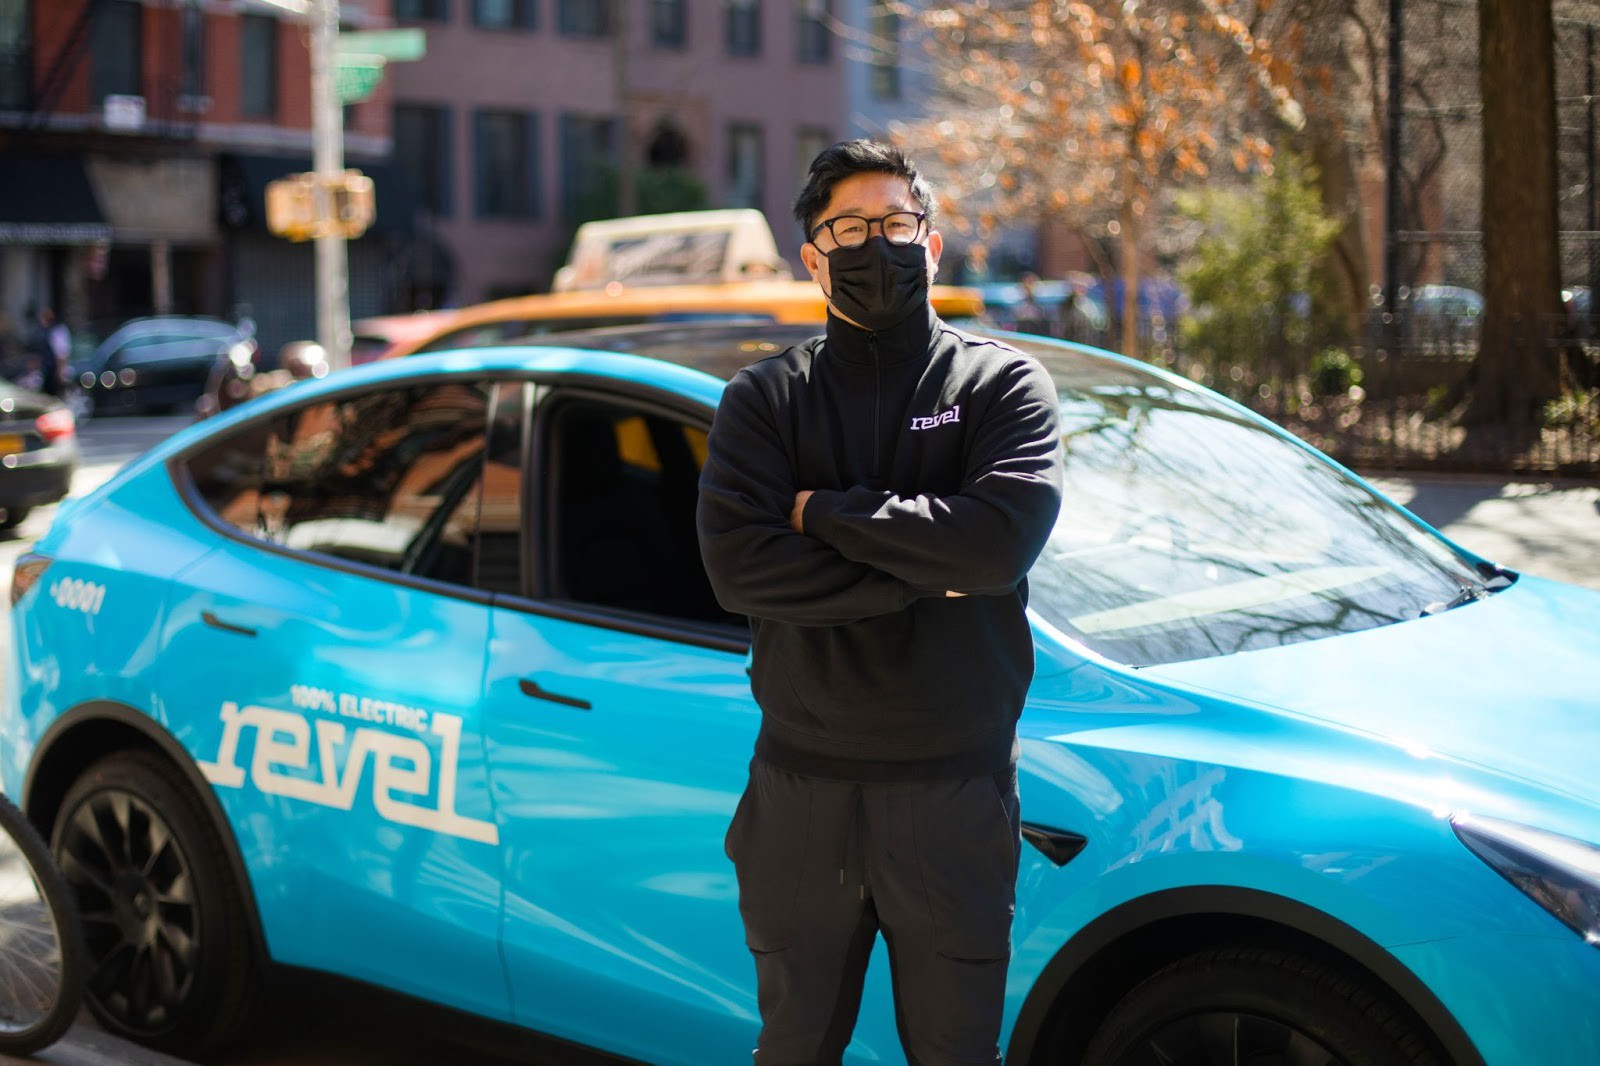 Revel launching ridehailing service in New York City with fleet of